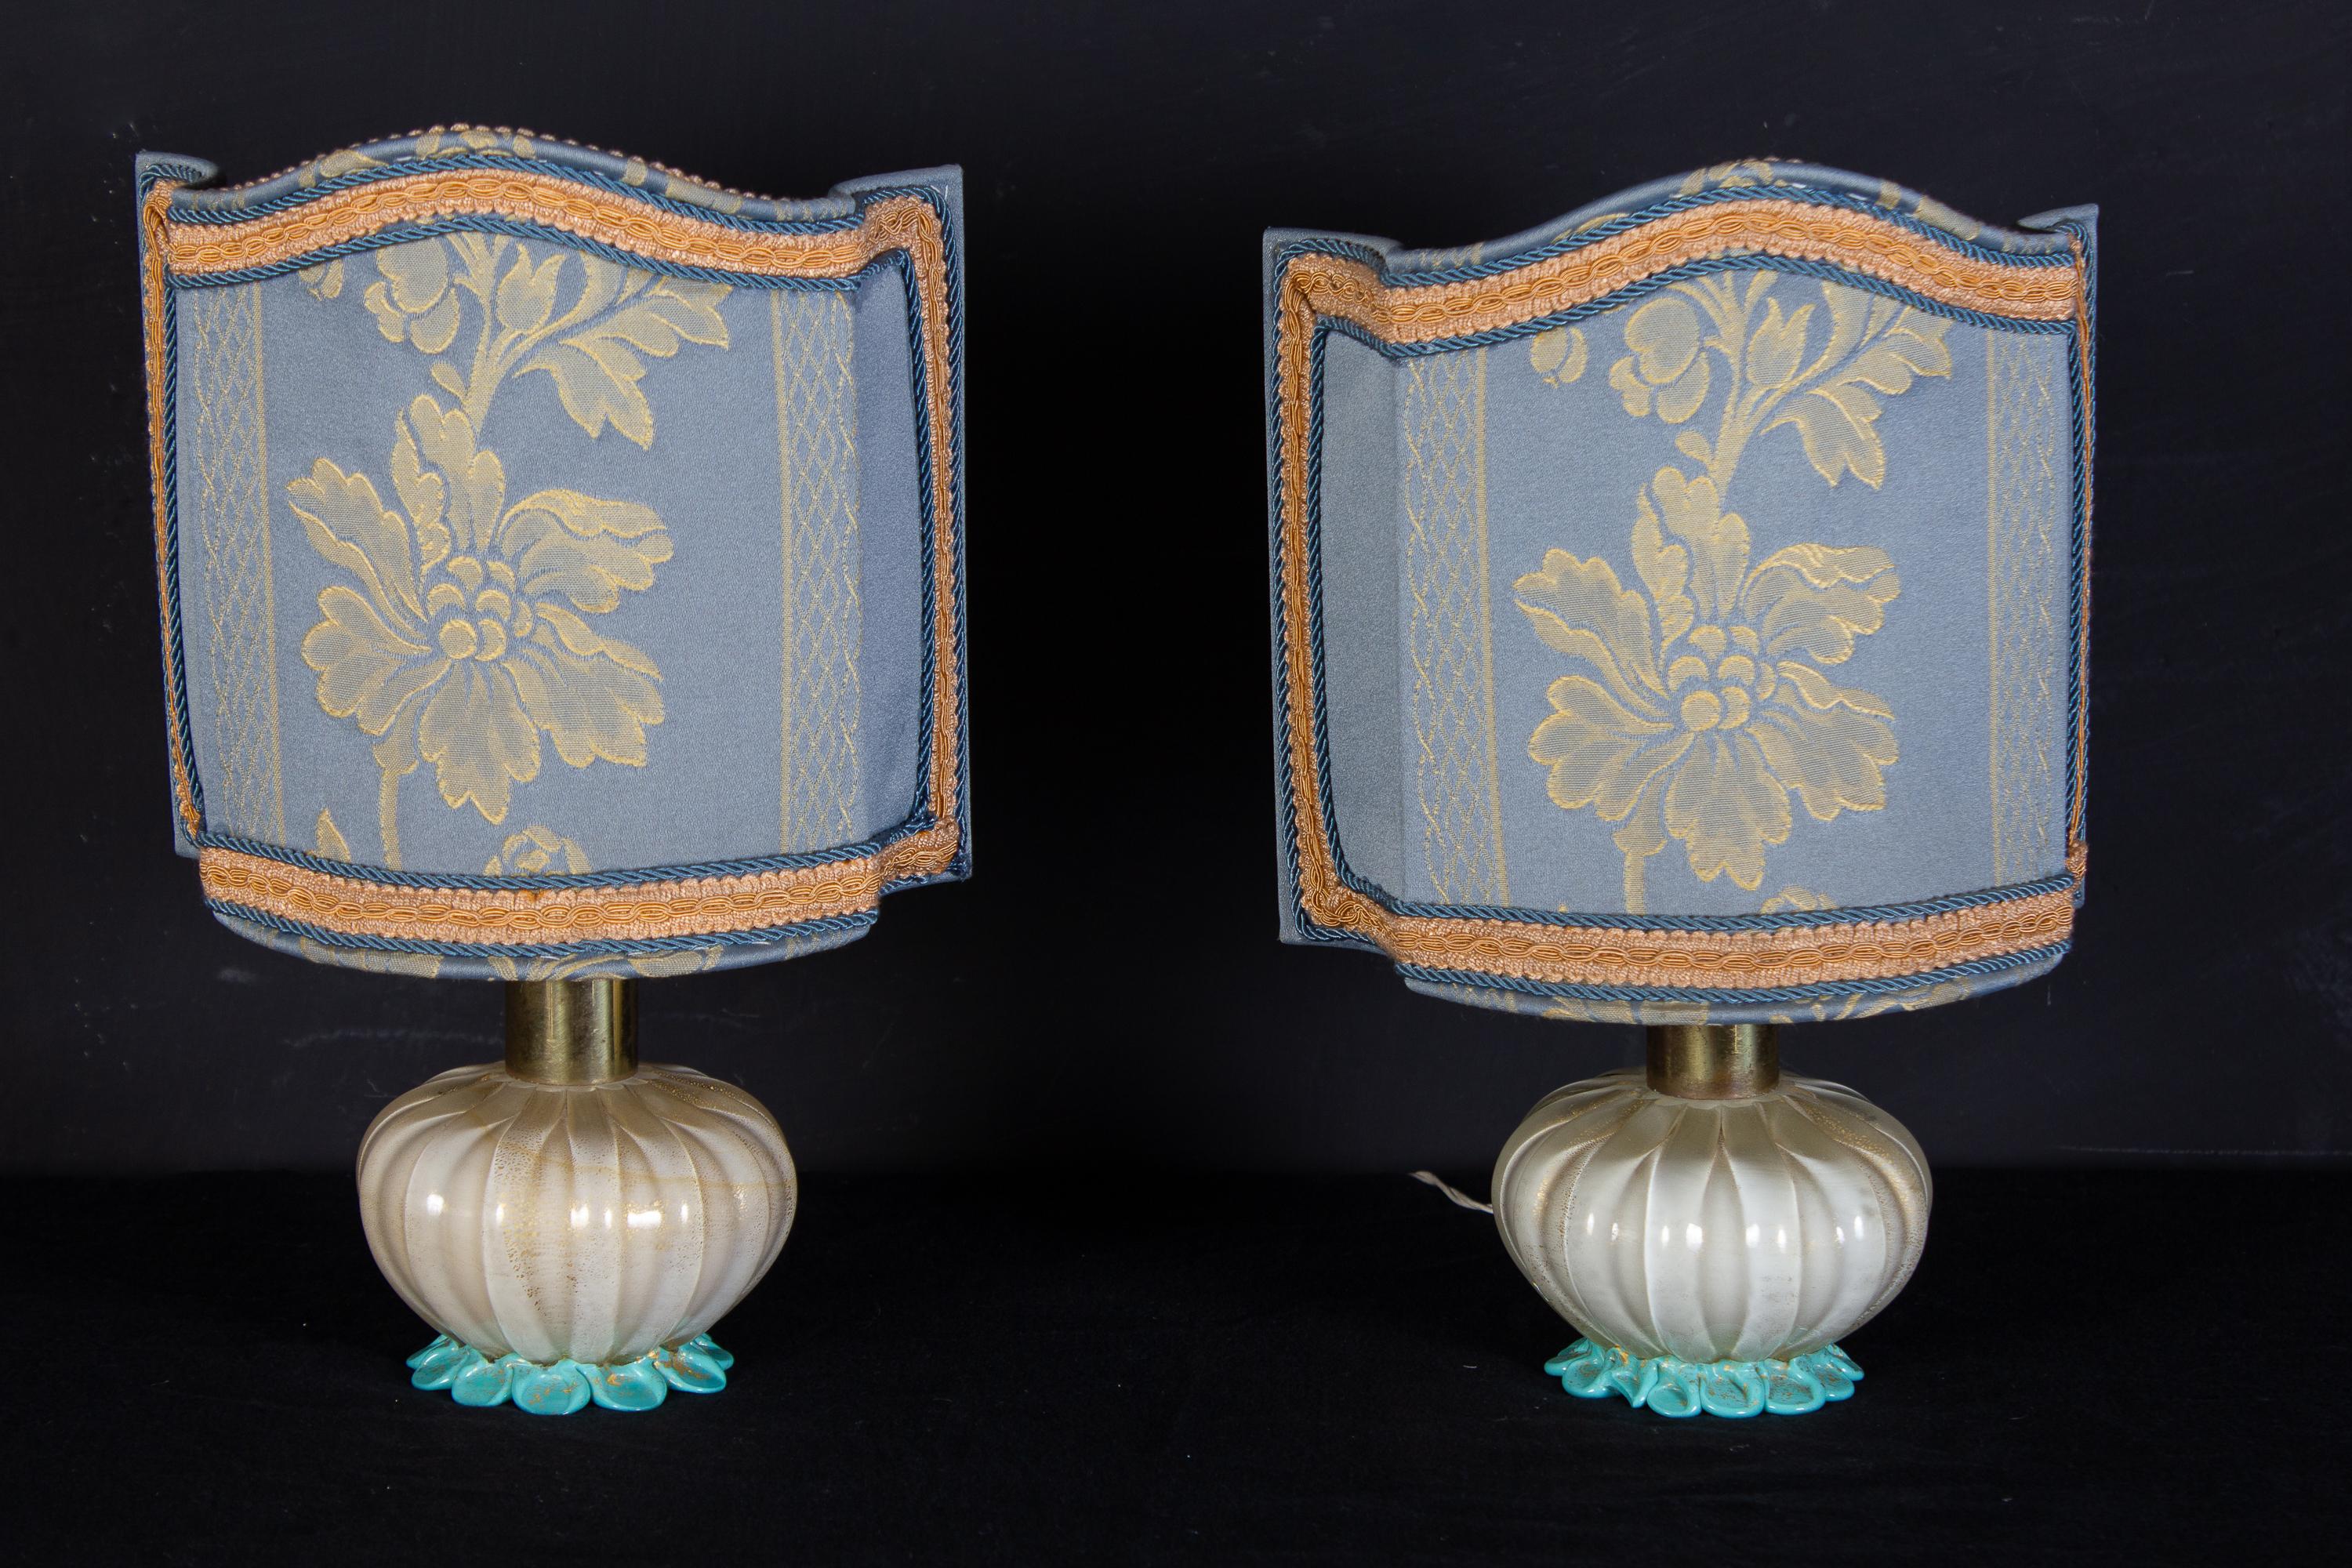 Pair of amazing small ivory colored Murano glass table lamps with turquoise 